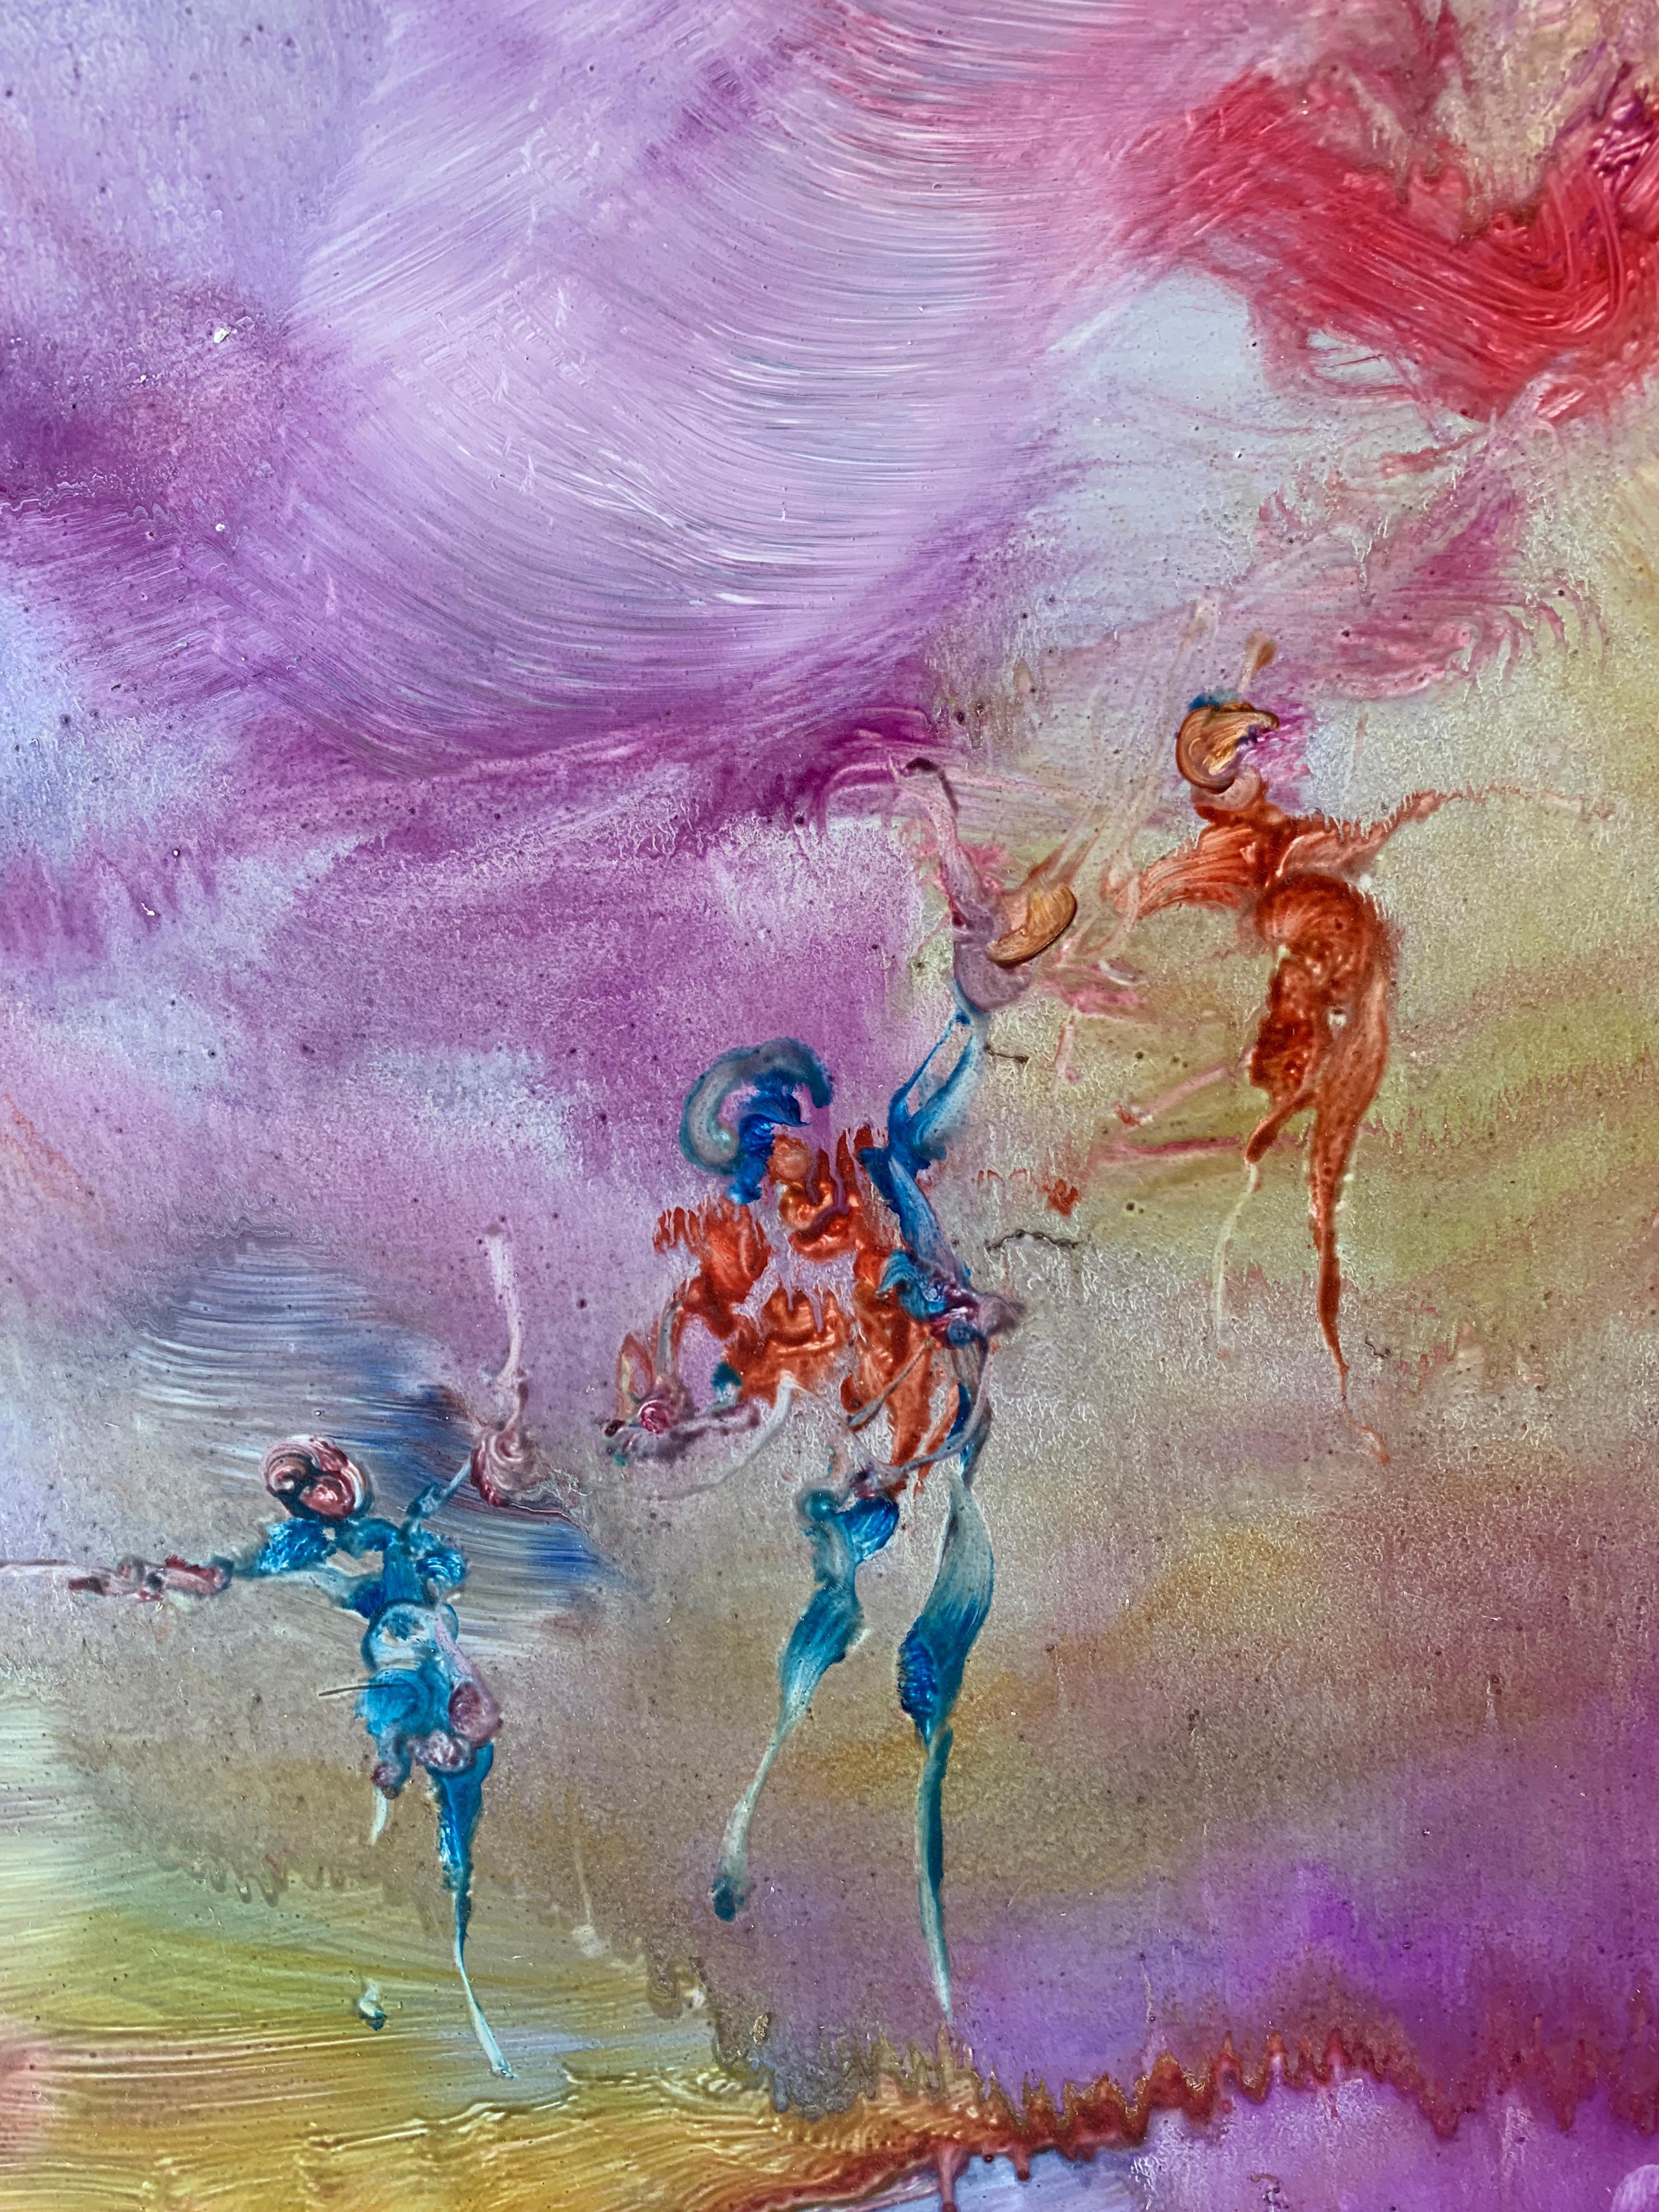 Angels at Play, Reginald Pollack Abstract Expressionist Oil Masonite 2